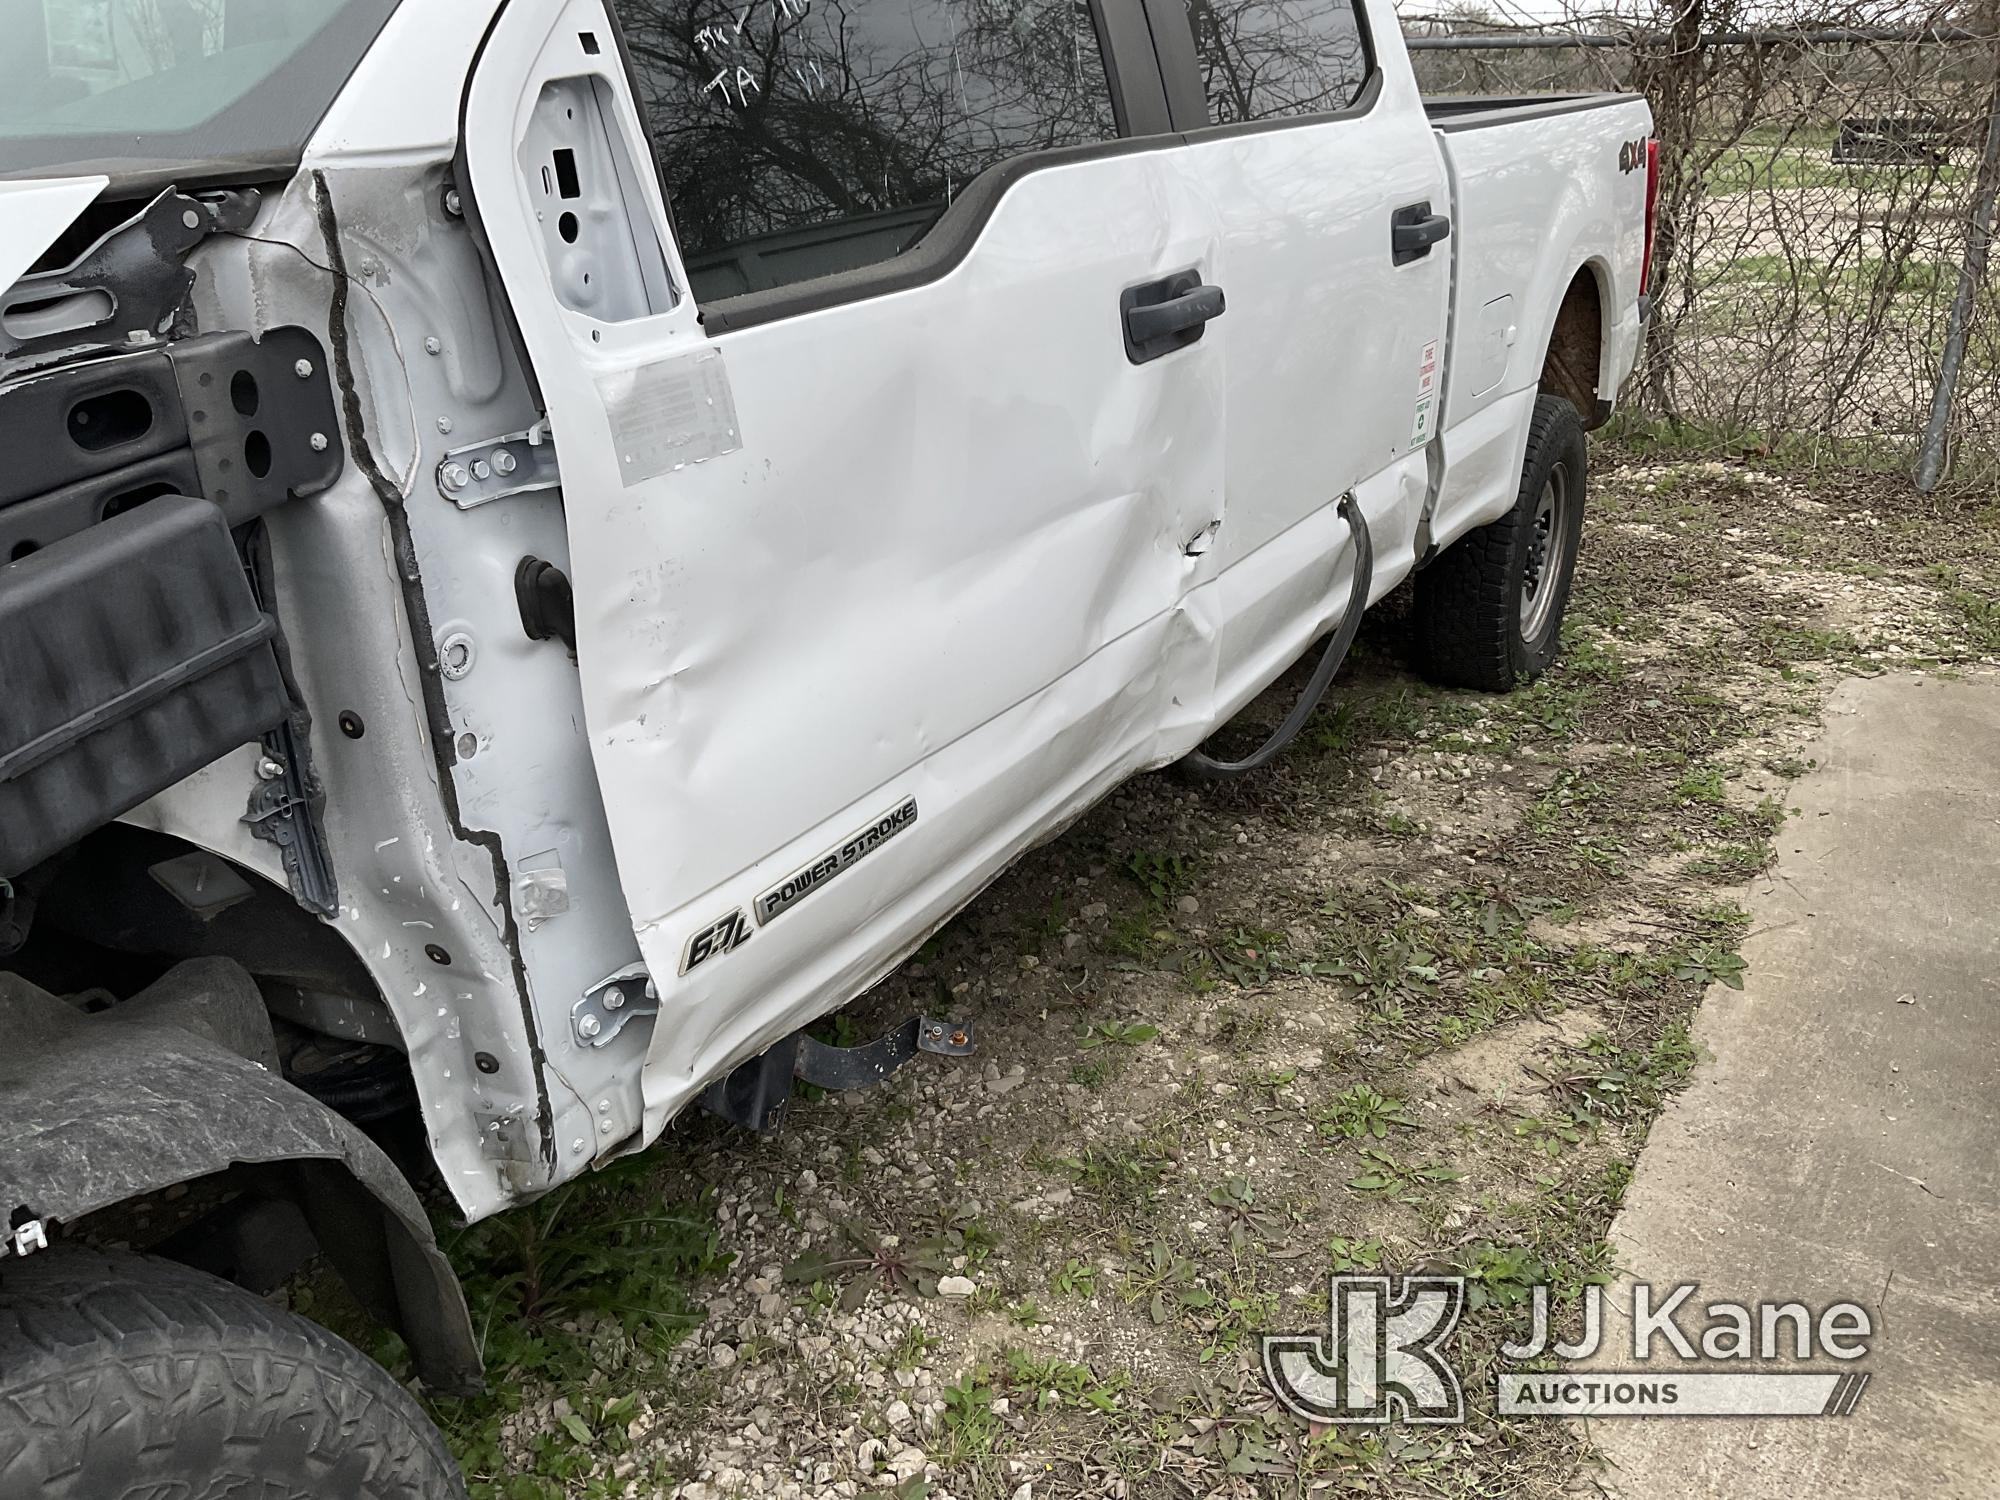 (Alvin, TX) 2020 Ford F250 4x4 Crew-Cab Pickup Truck Wrecked, Does Not Run Or Start, Airbags Deploye